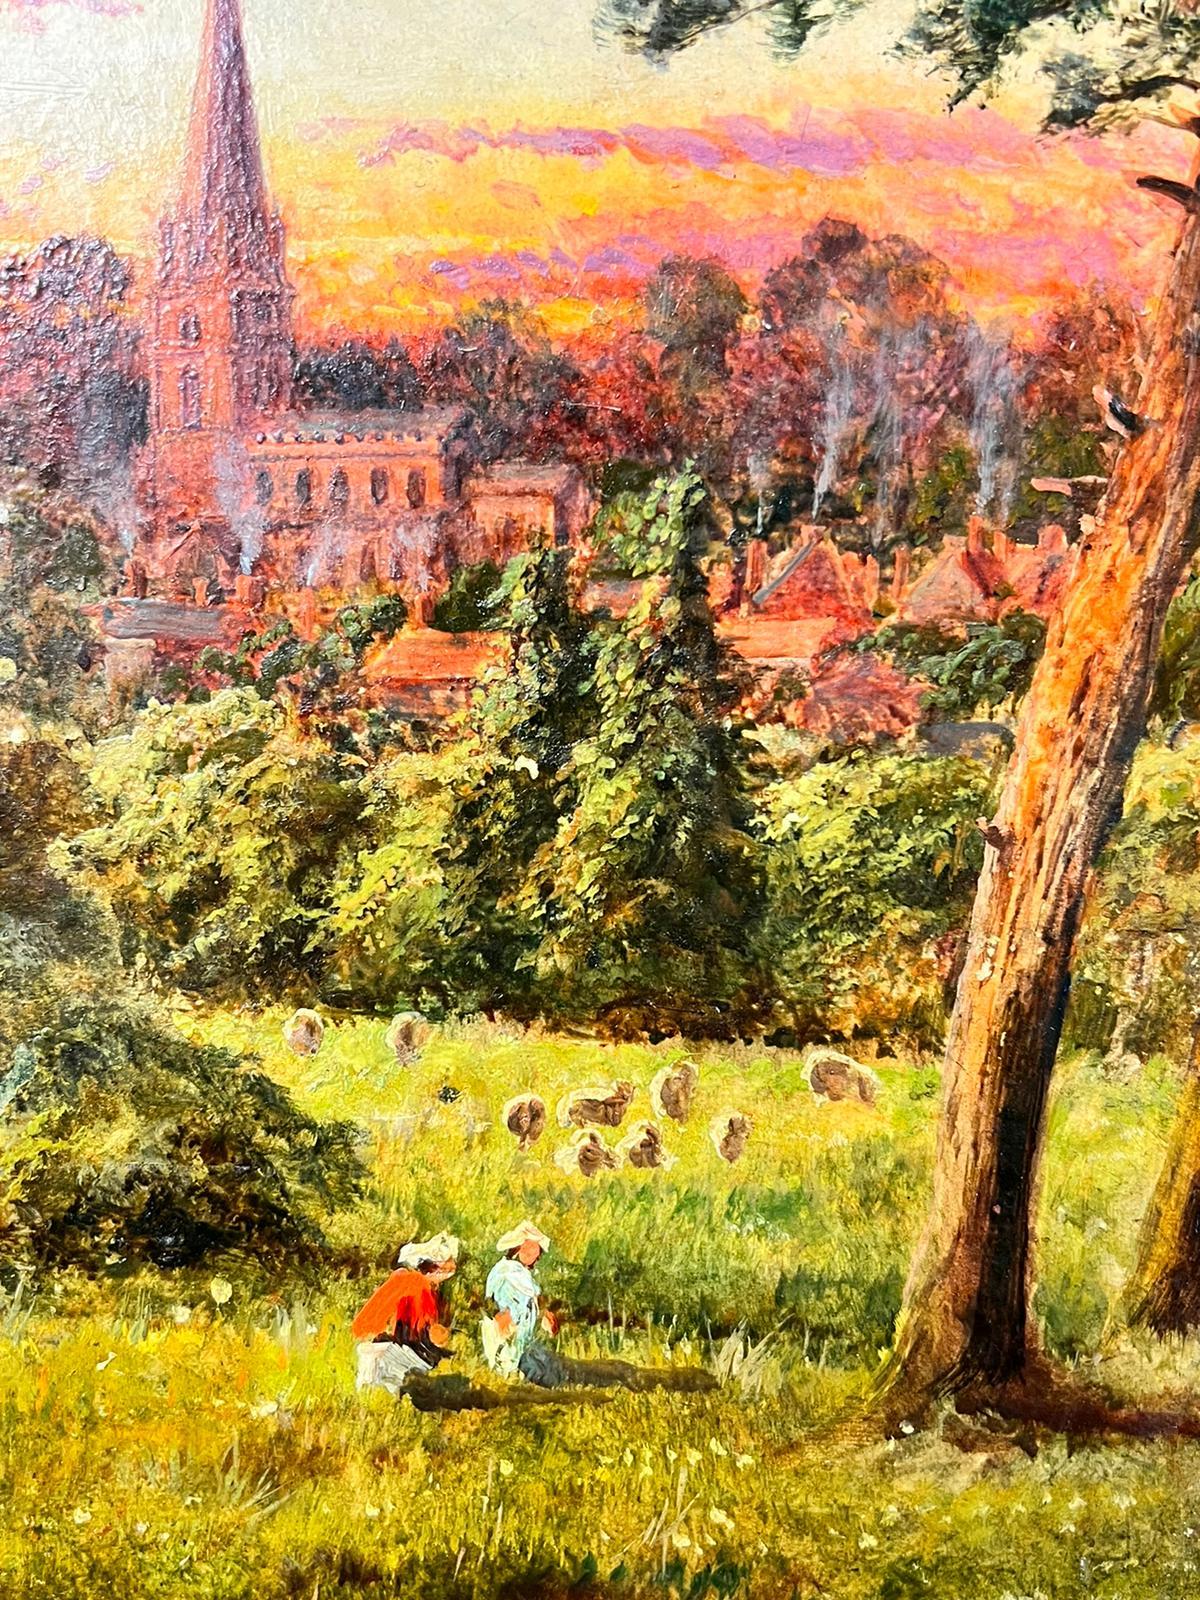 Antique Victorian English Figures In Sheep Field With The Sunrise Over Village - Painting by Antique English 